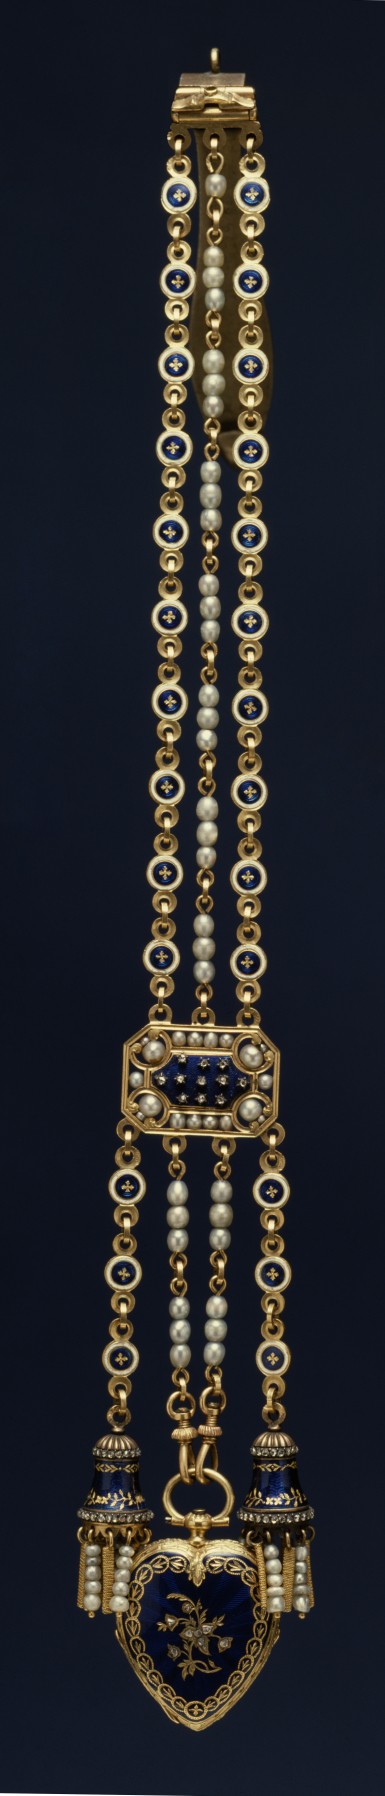 Heart-Shaped Watch and Chatelaine